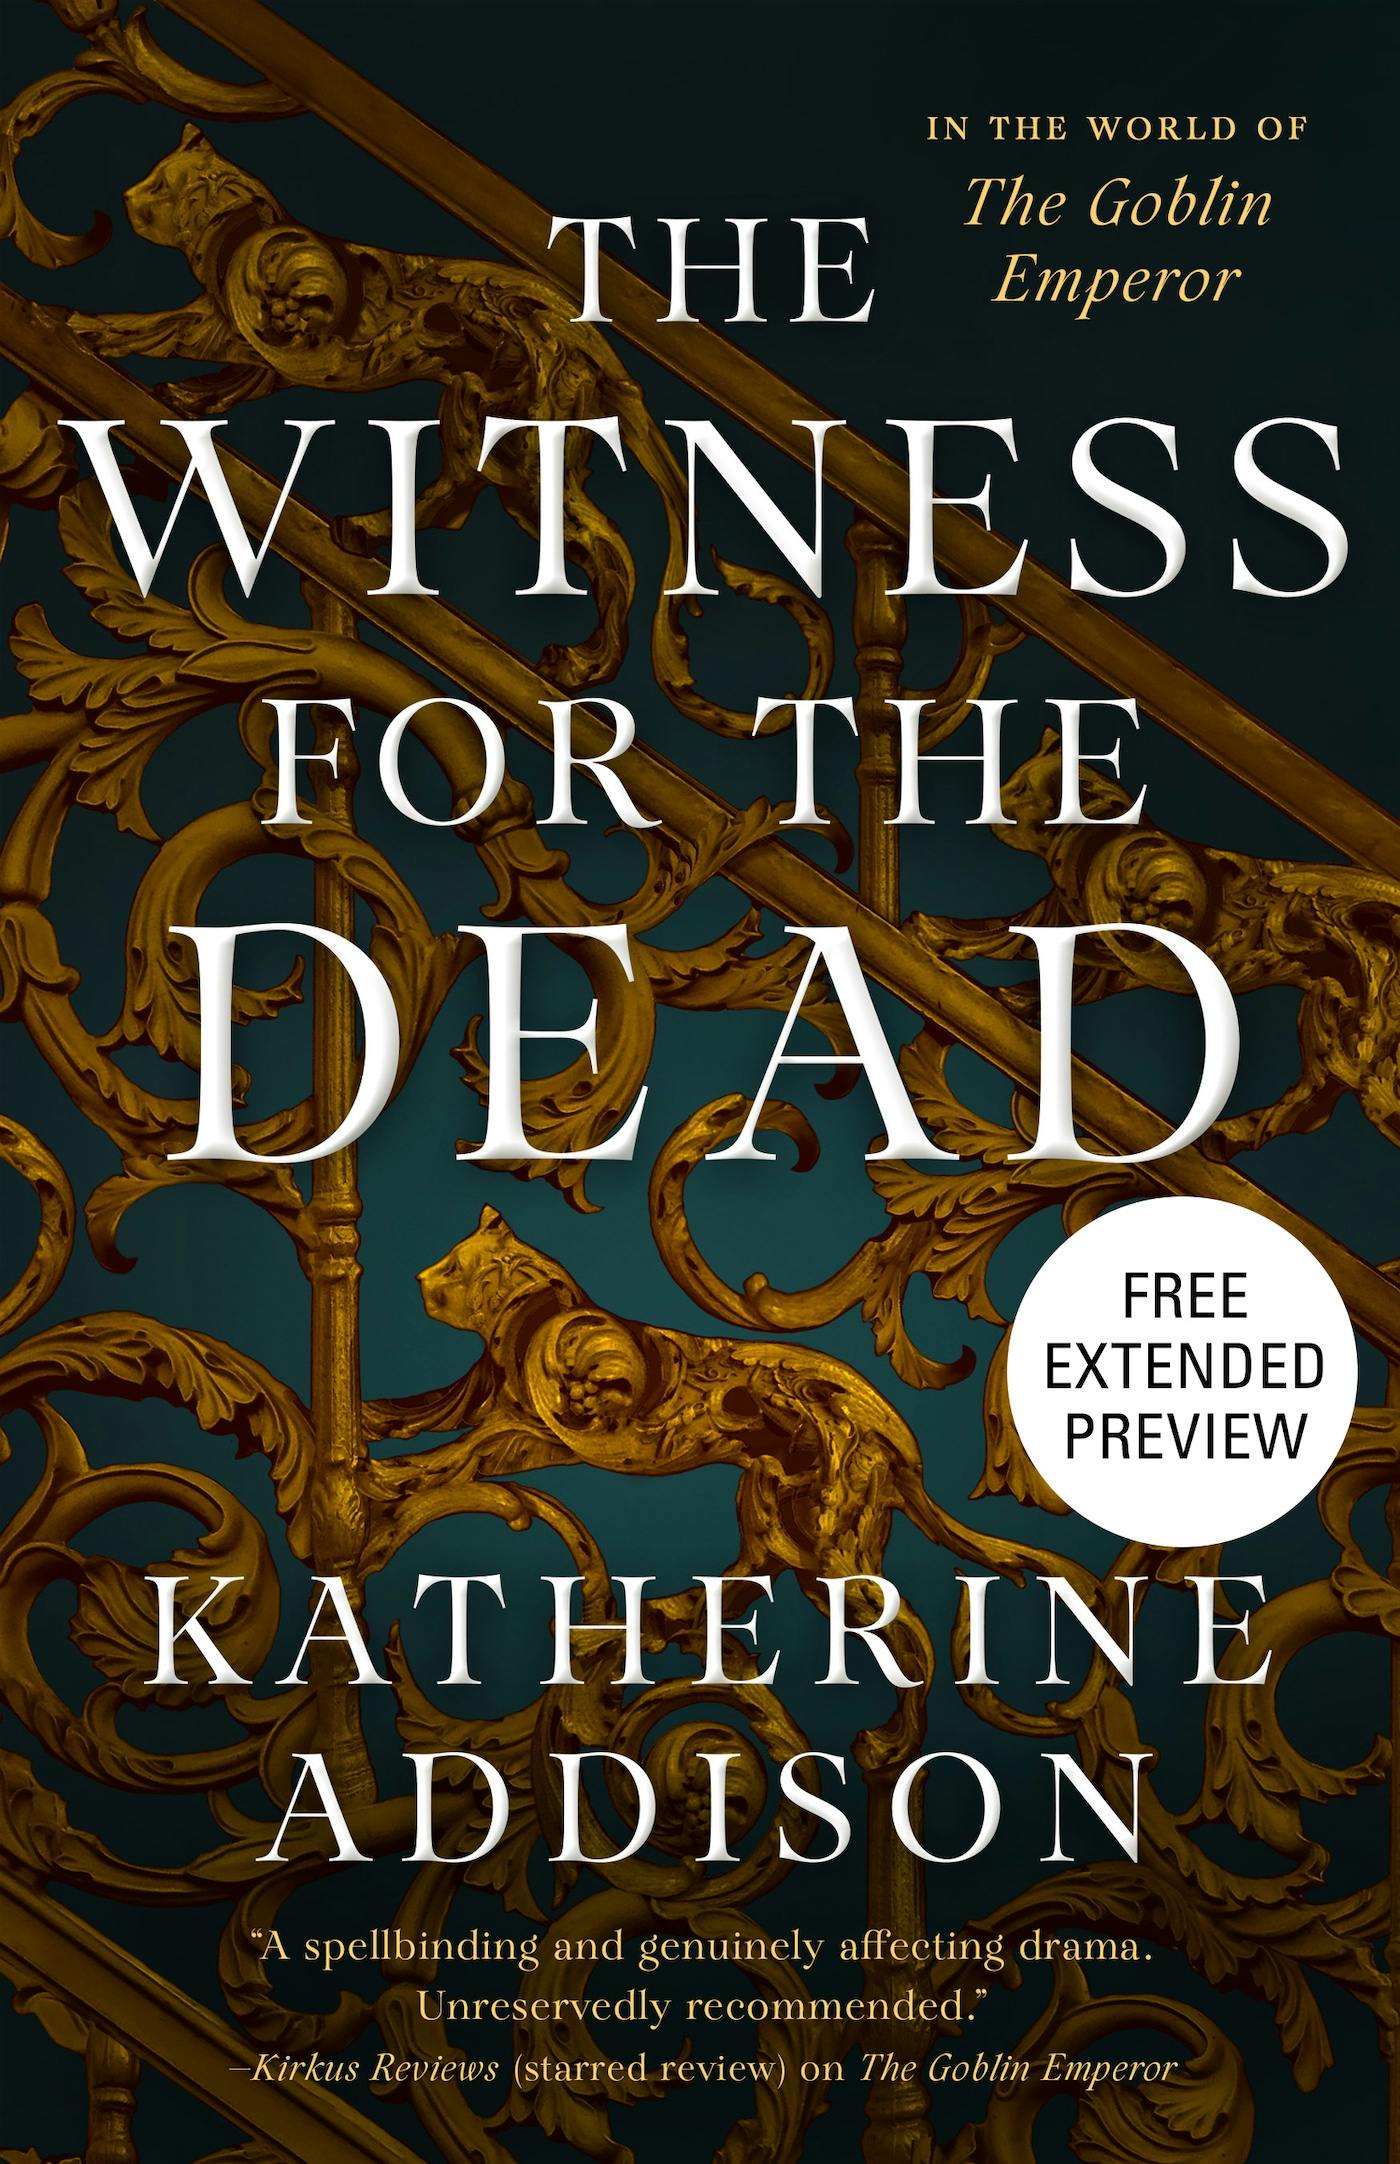 Cover for the book titled as: The Witness for the Dead Sneak Peek